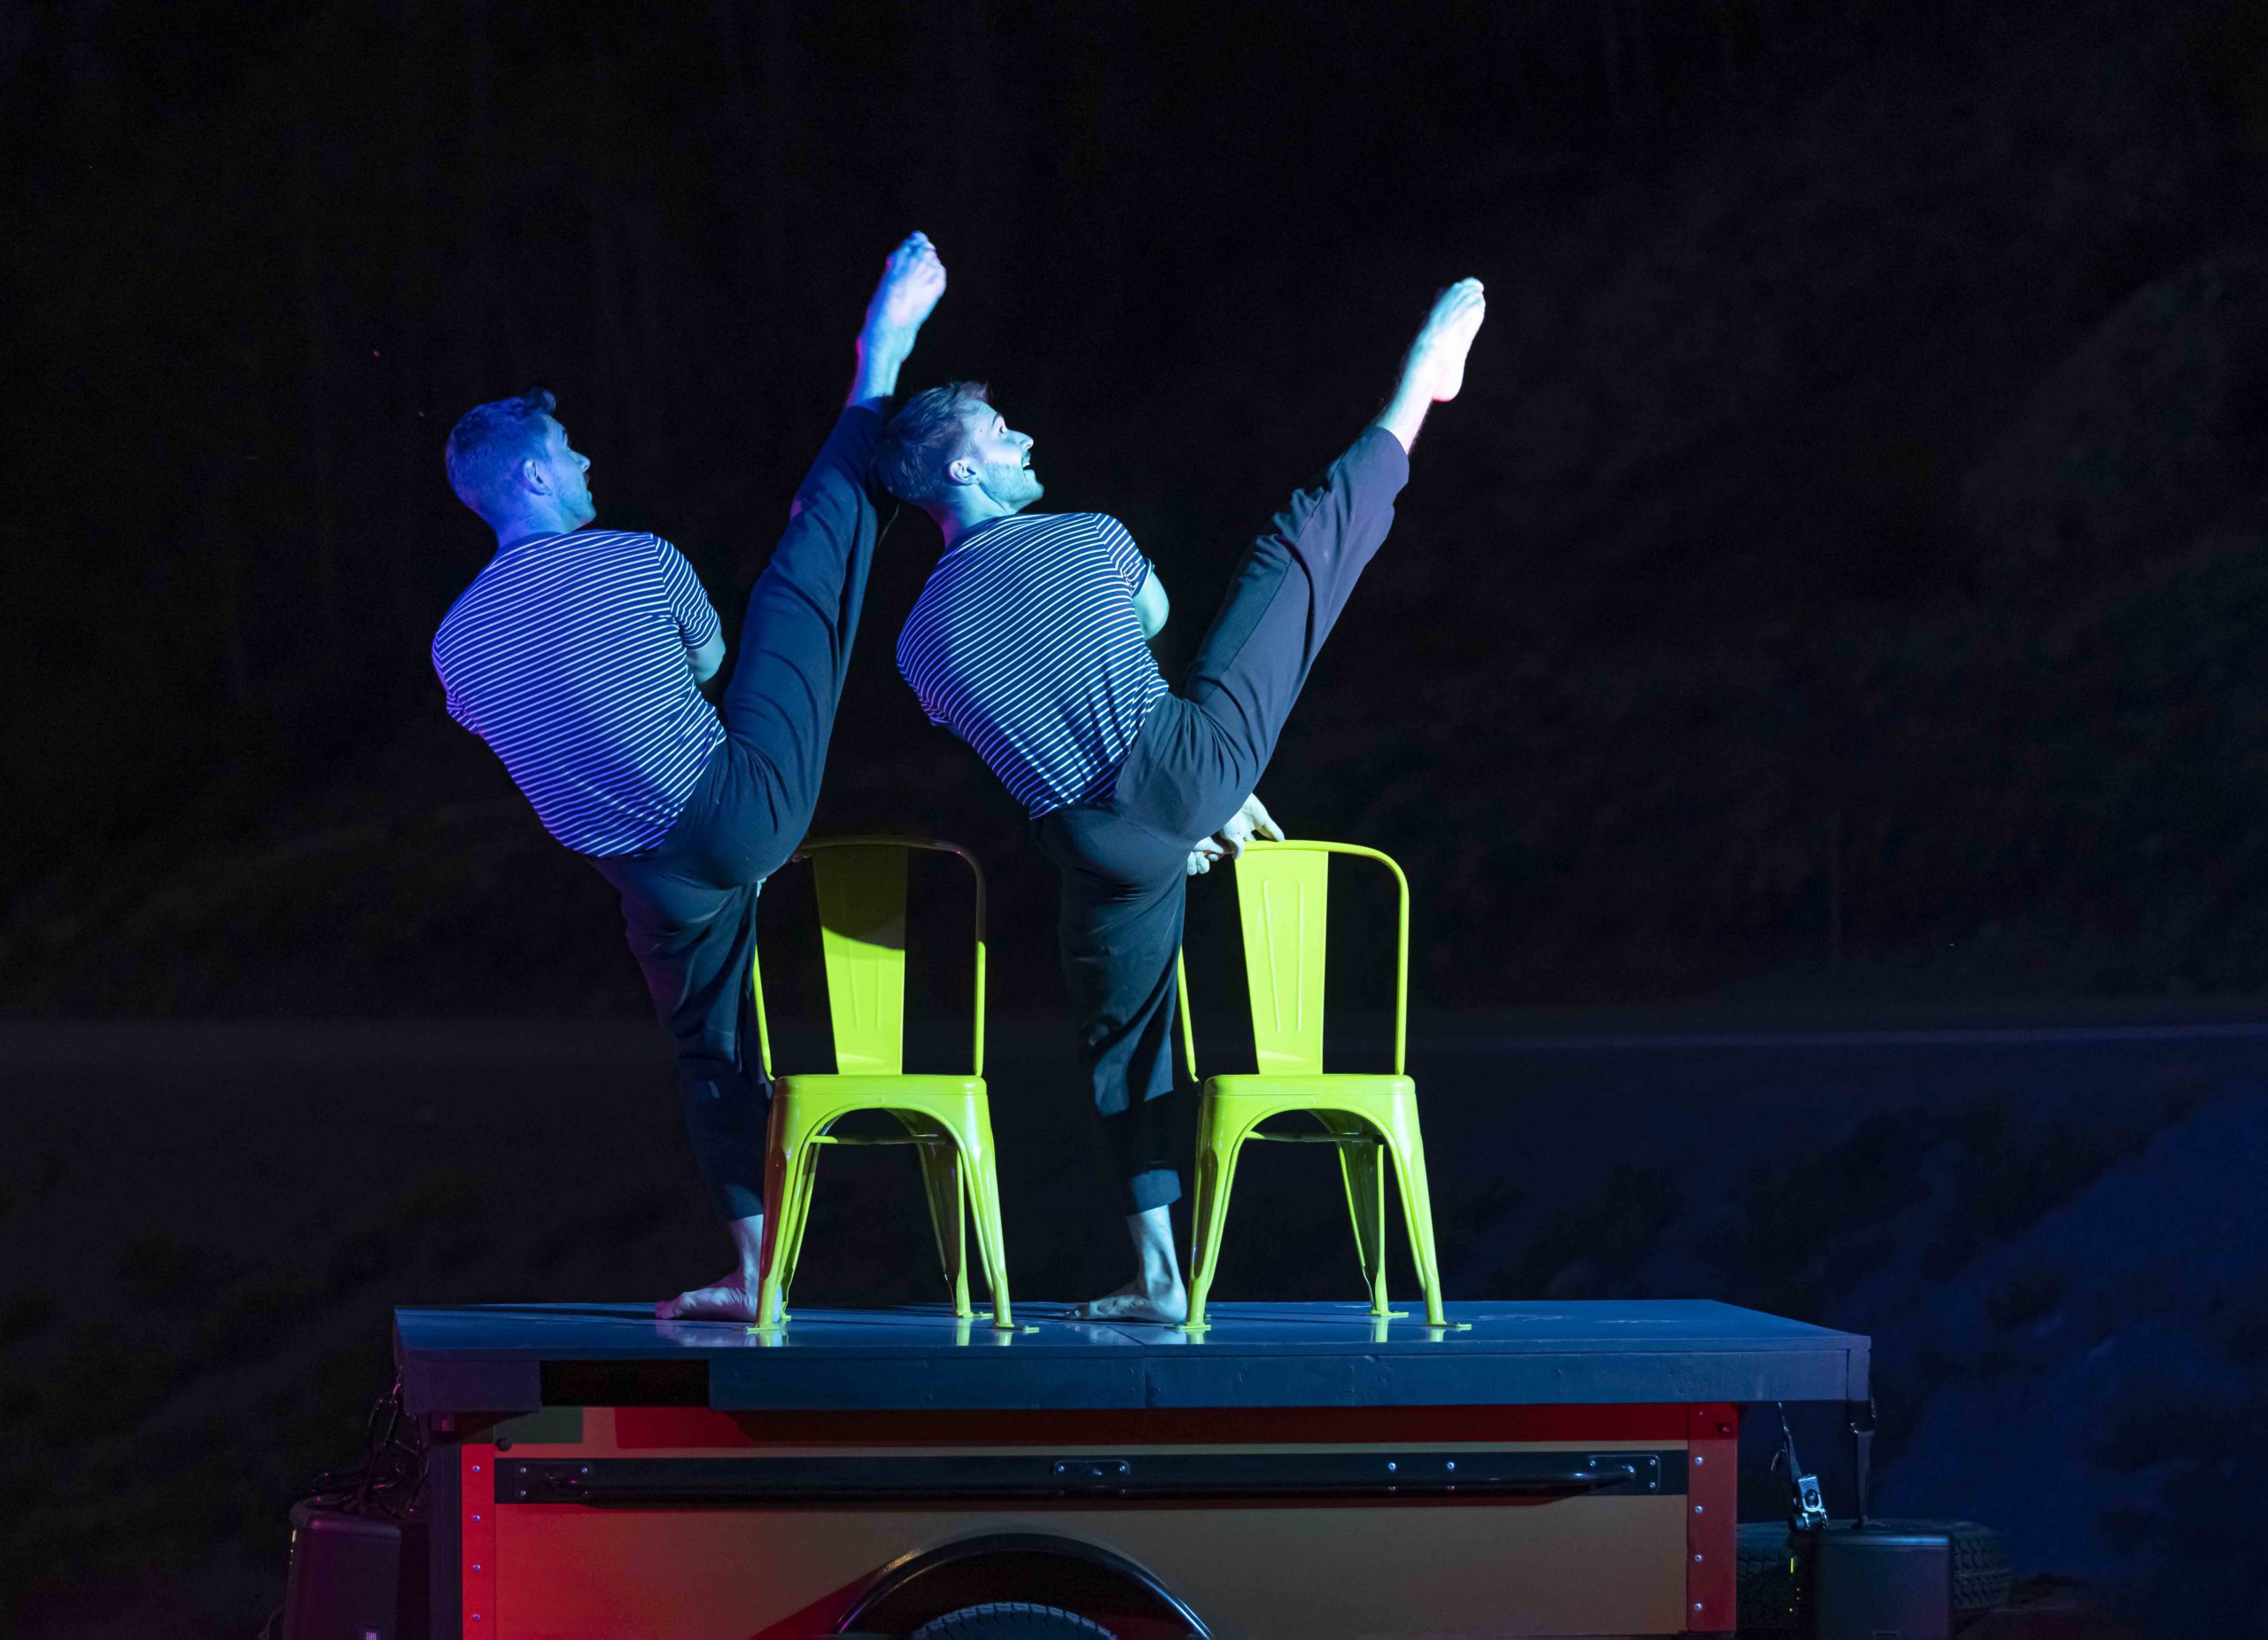 Two dancers with striped shirts extending their legs as they lean off chairs